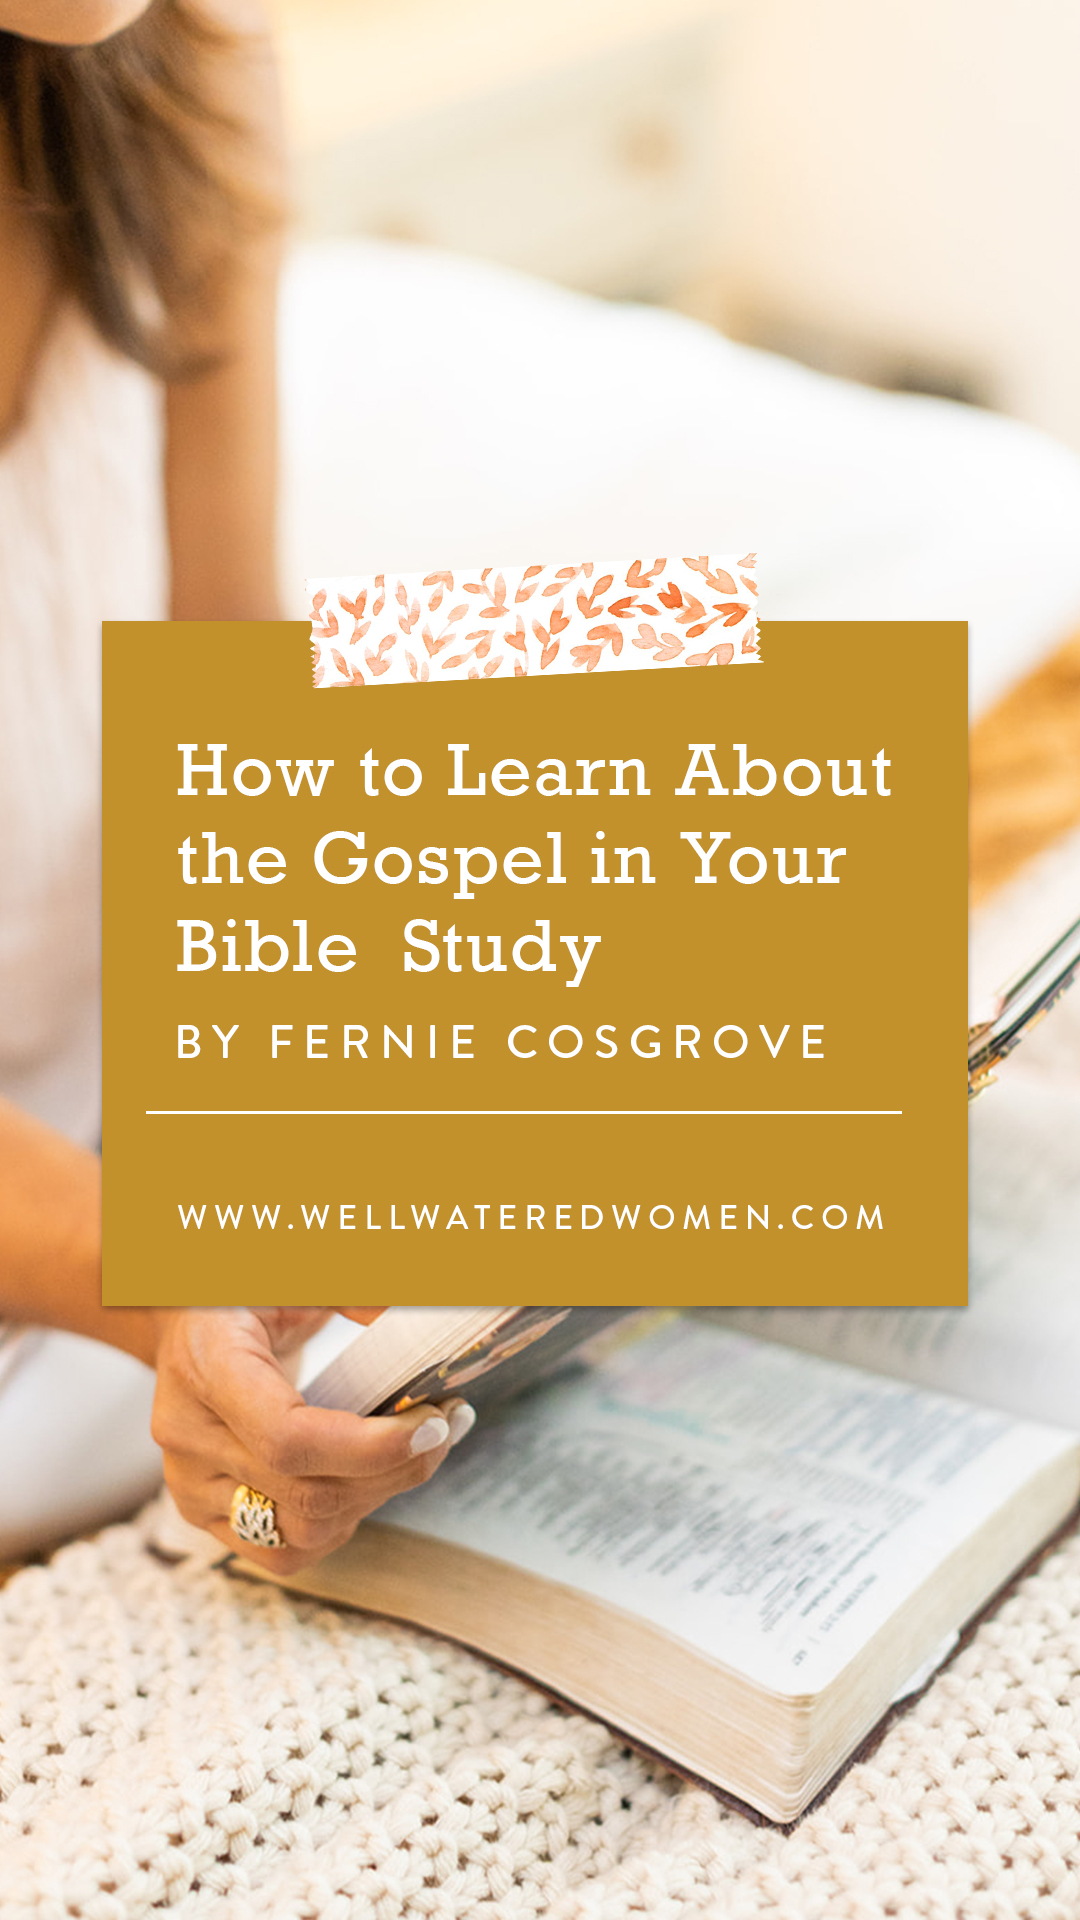 How to Learn About the Gospel in Your Bible Study – an Article by Well-Watered Women